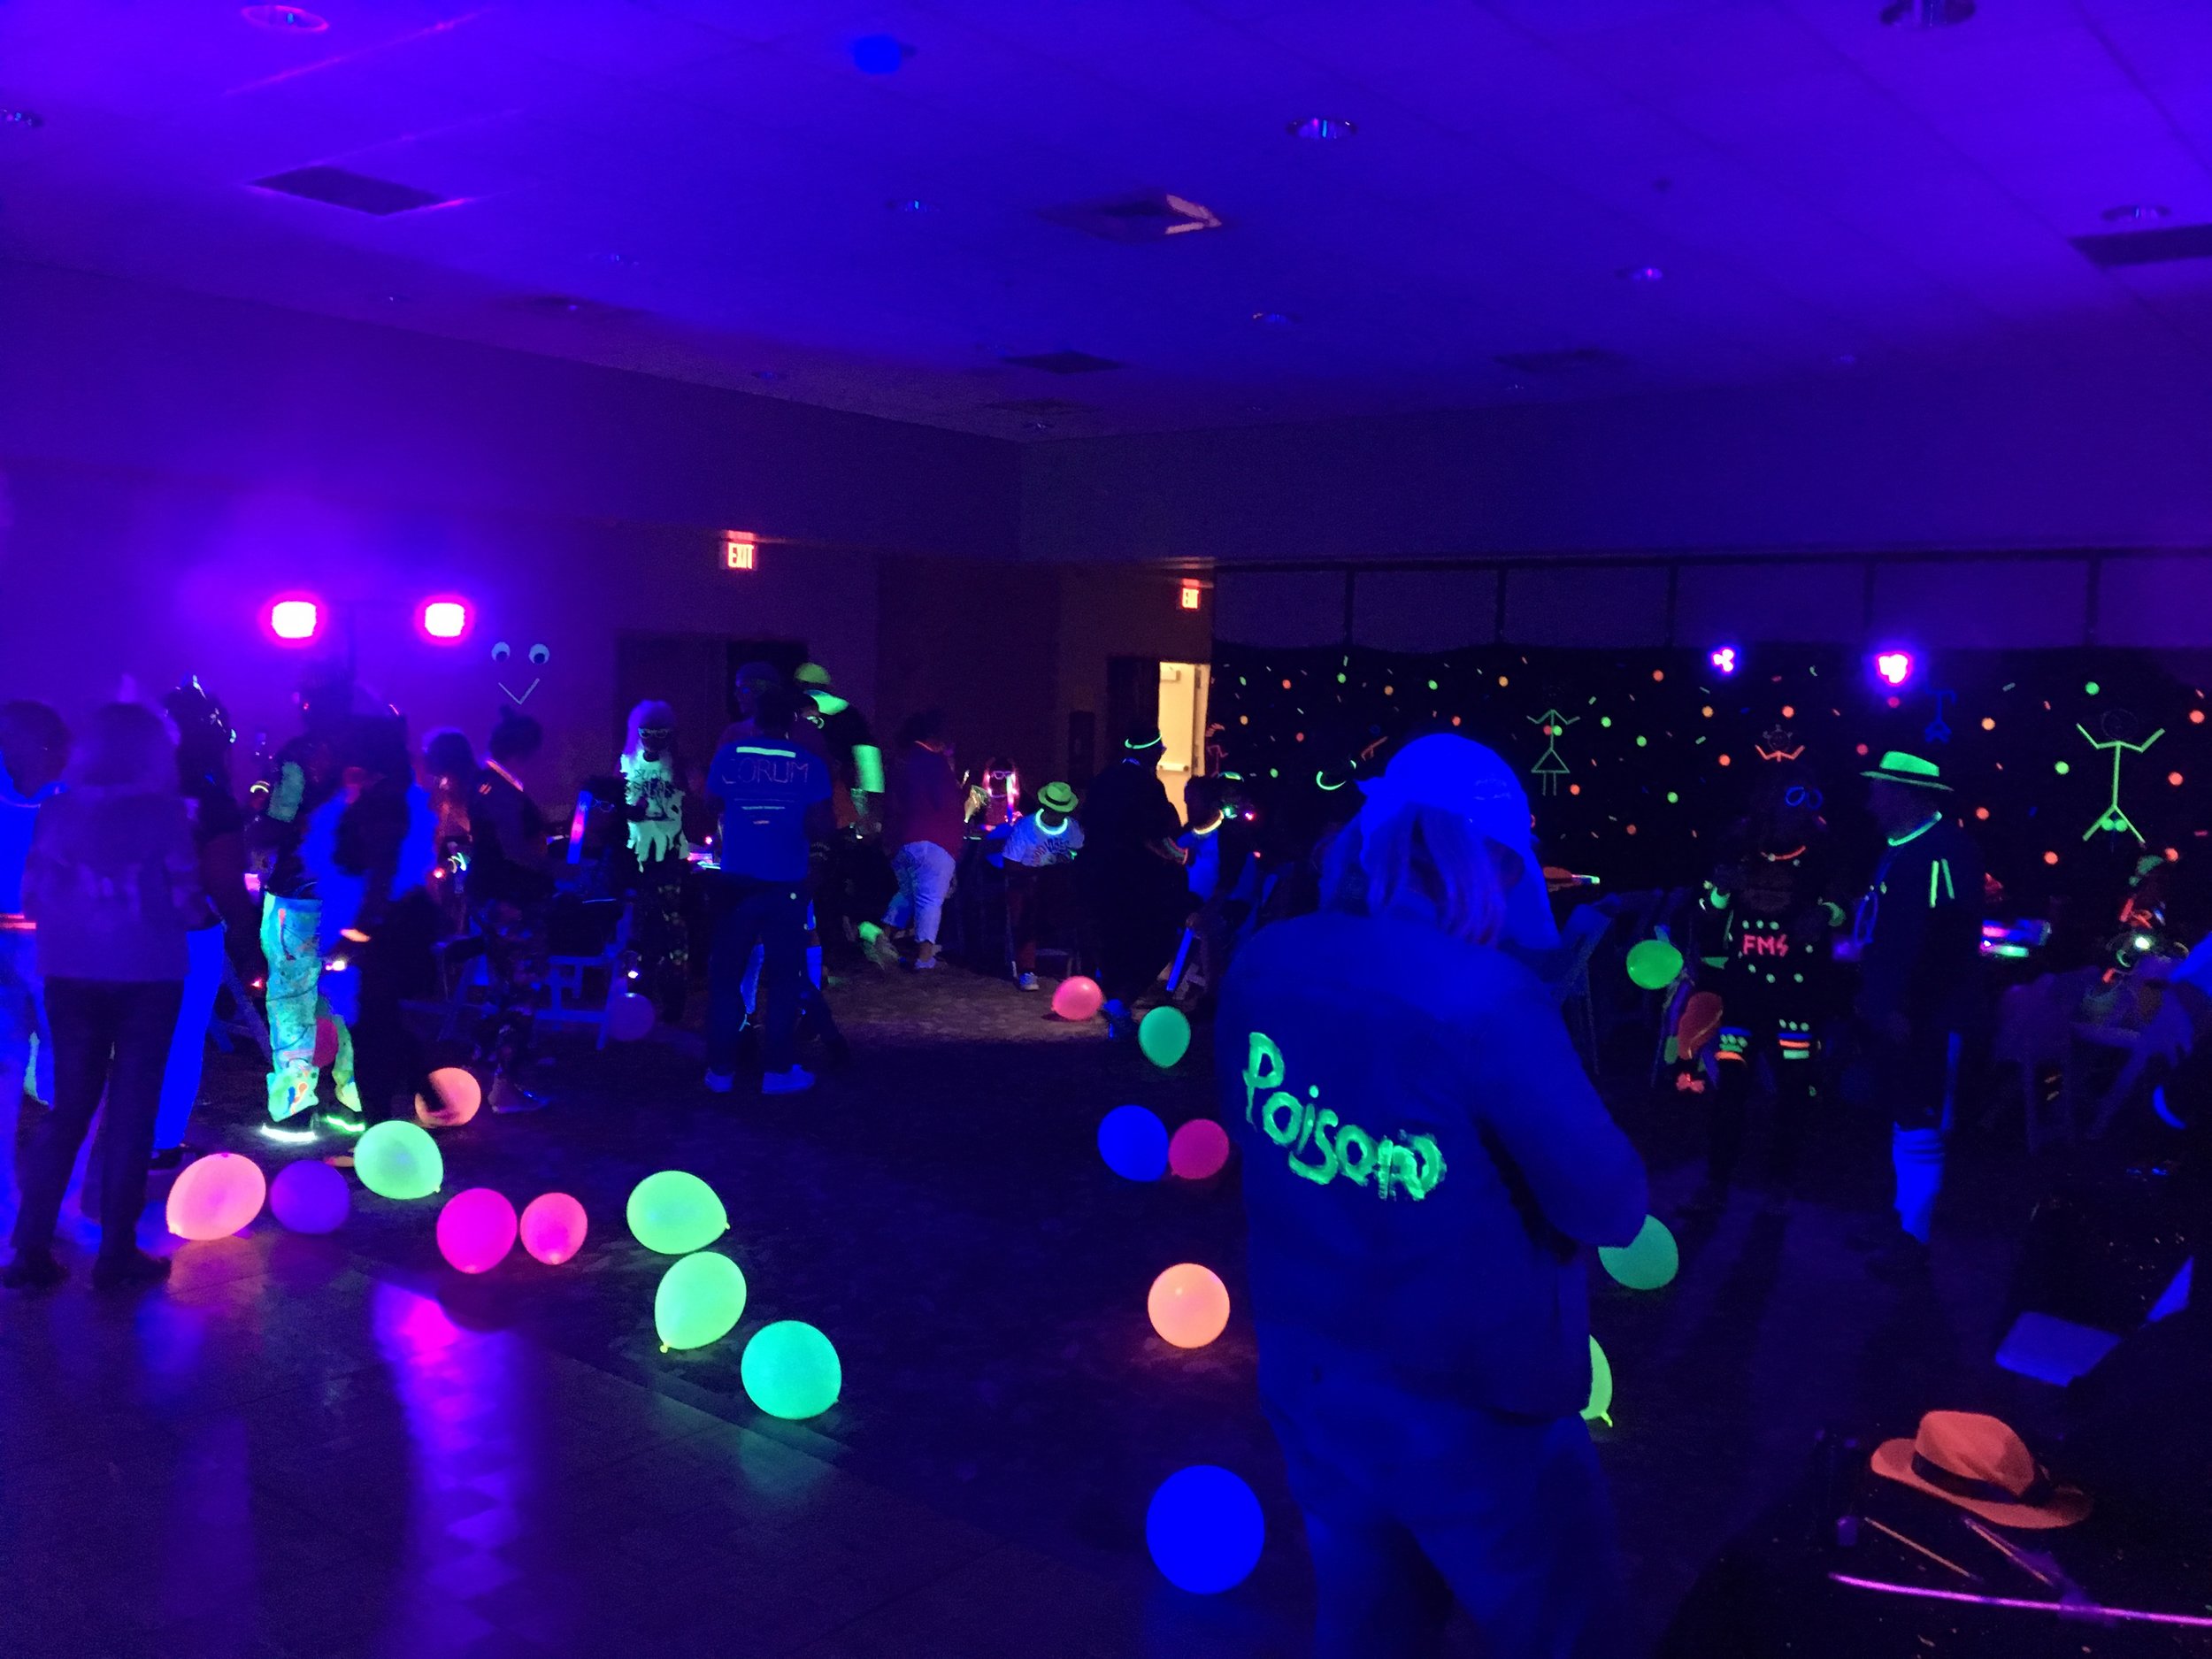  Full Contact Karaoke band at the FMS Glow party 2018 